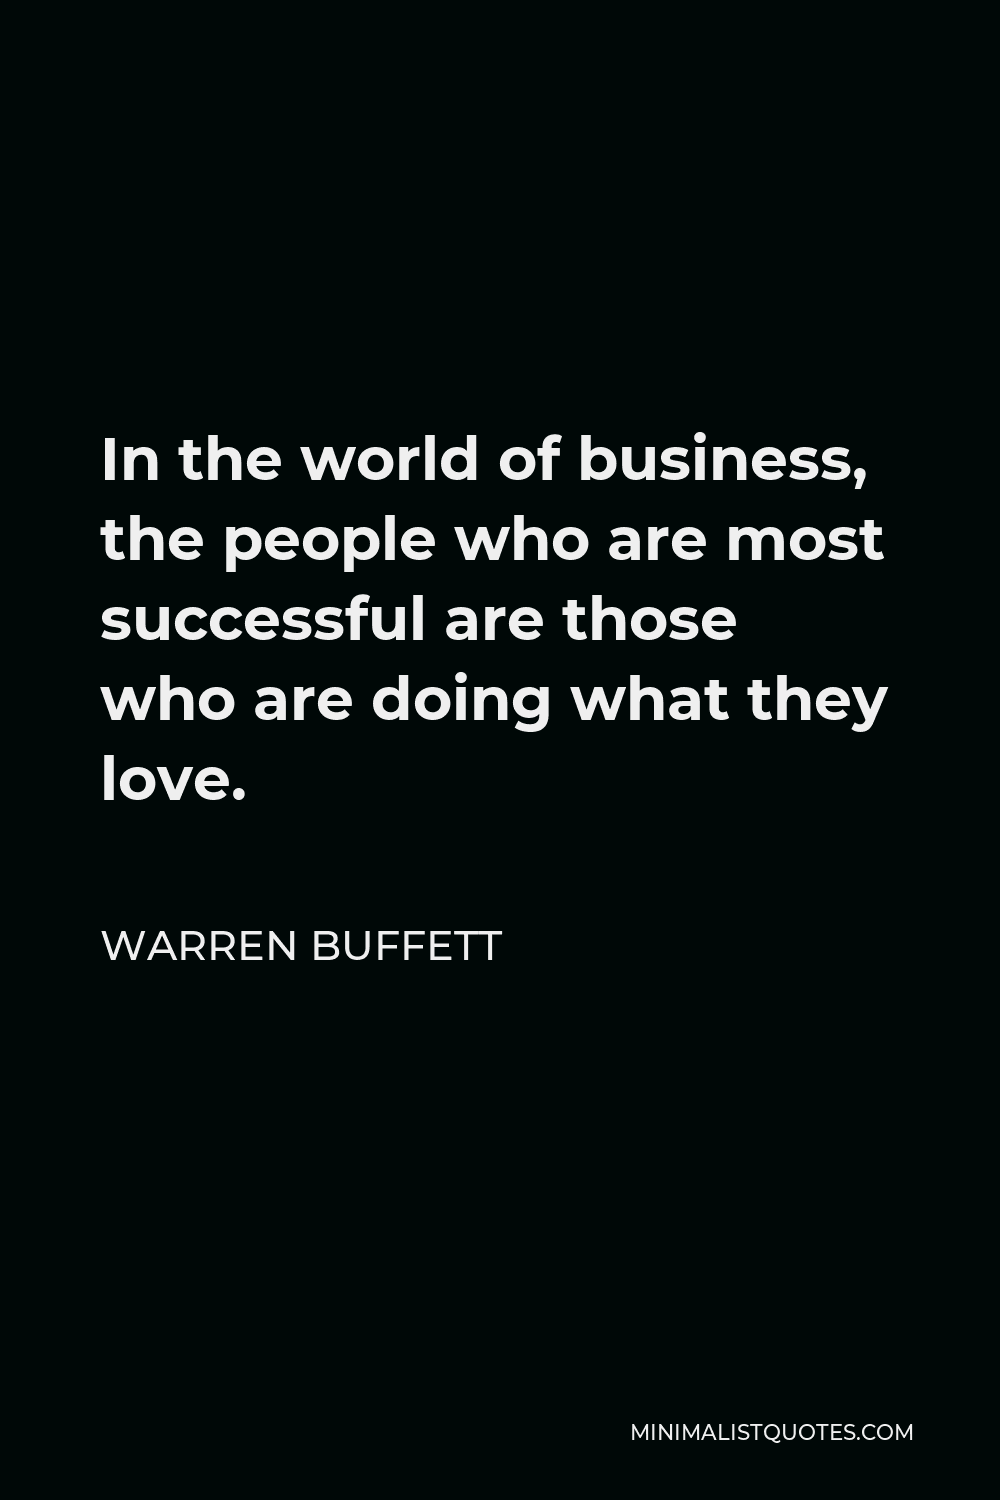 Warren Buffett Quote In The World Of Business The People Who Are Most Successful Are Those